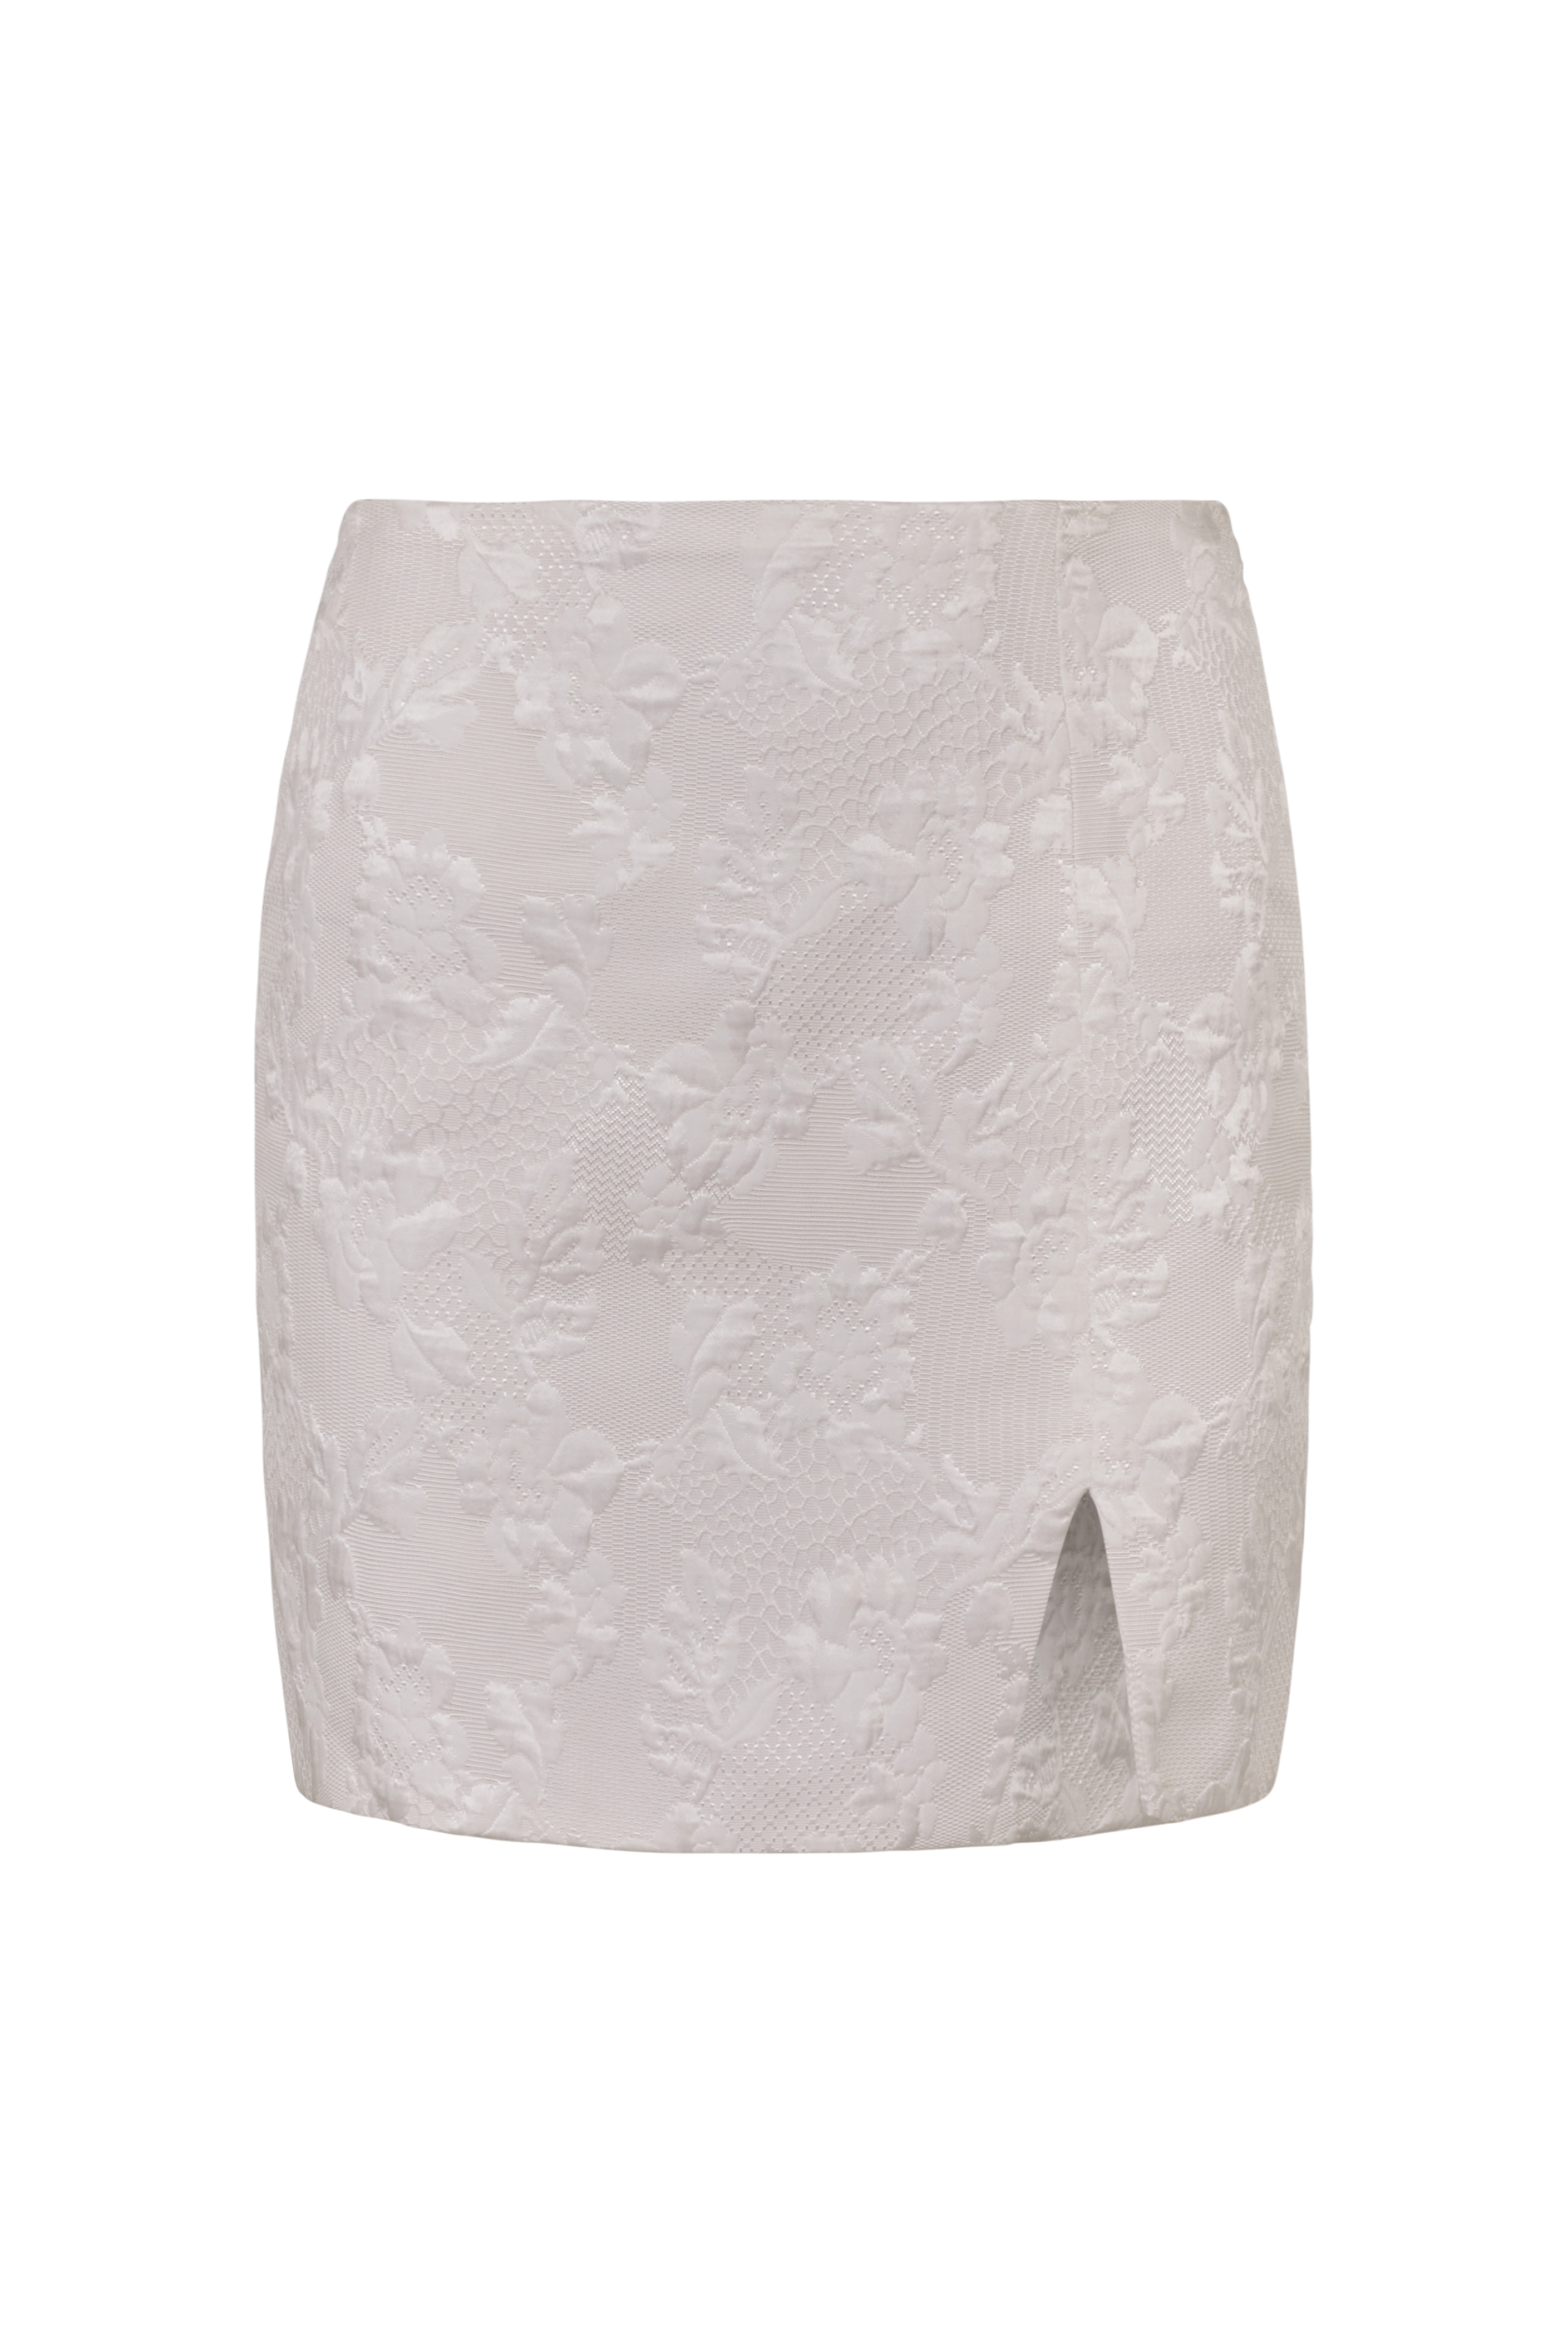 Nº12 MINI SKIRT WITH SIDE SLIT & VERY SOFT TOUCH | Wedding Collection